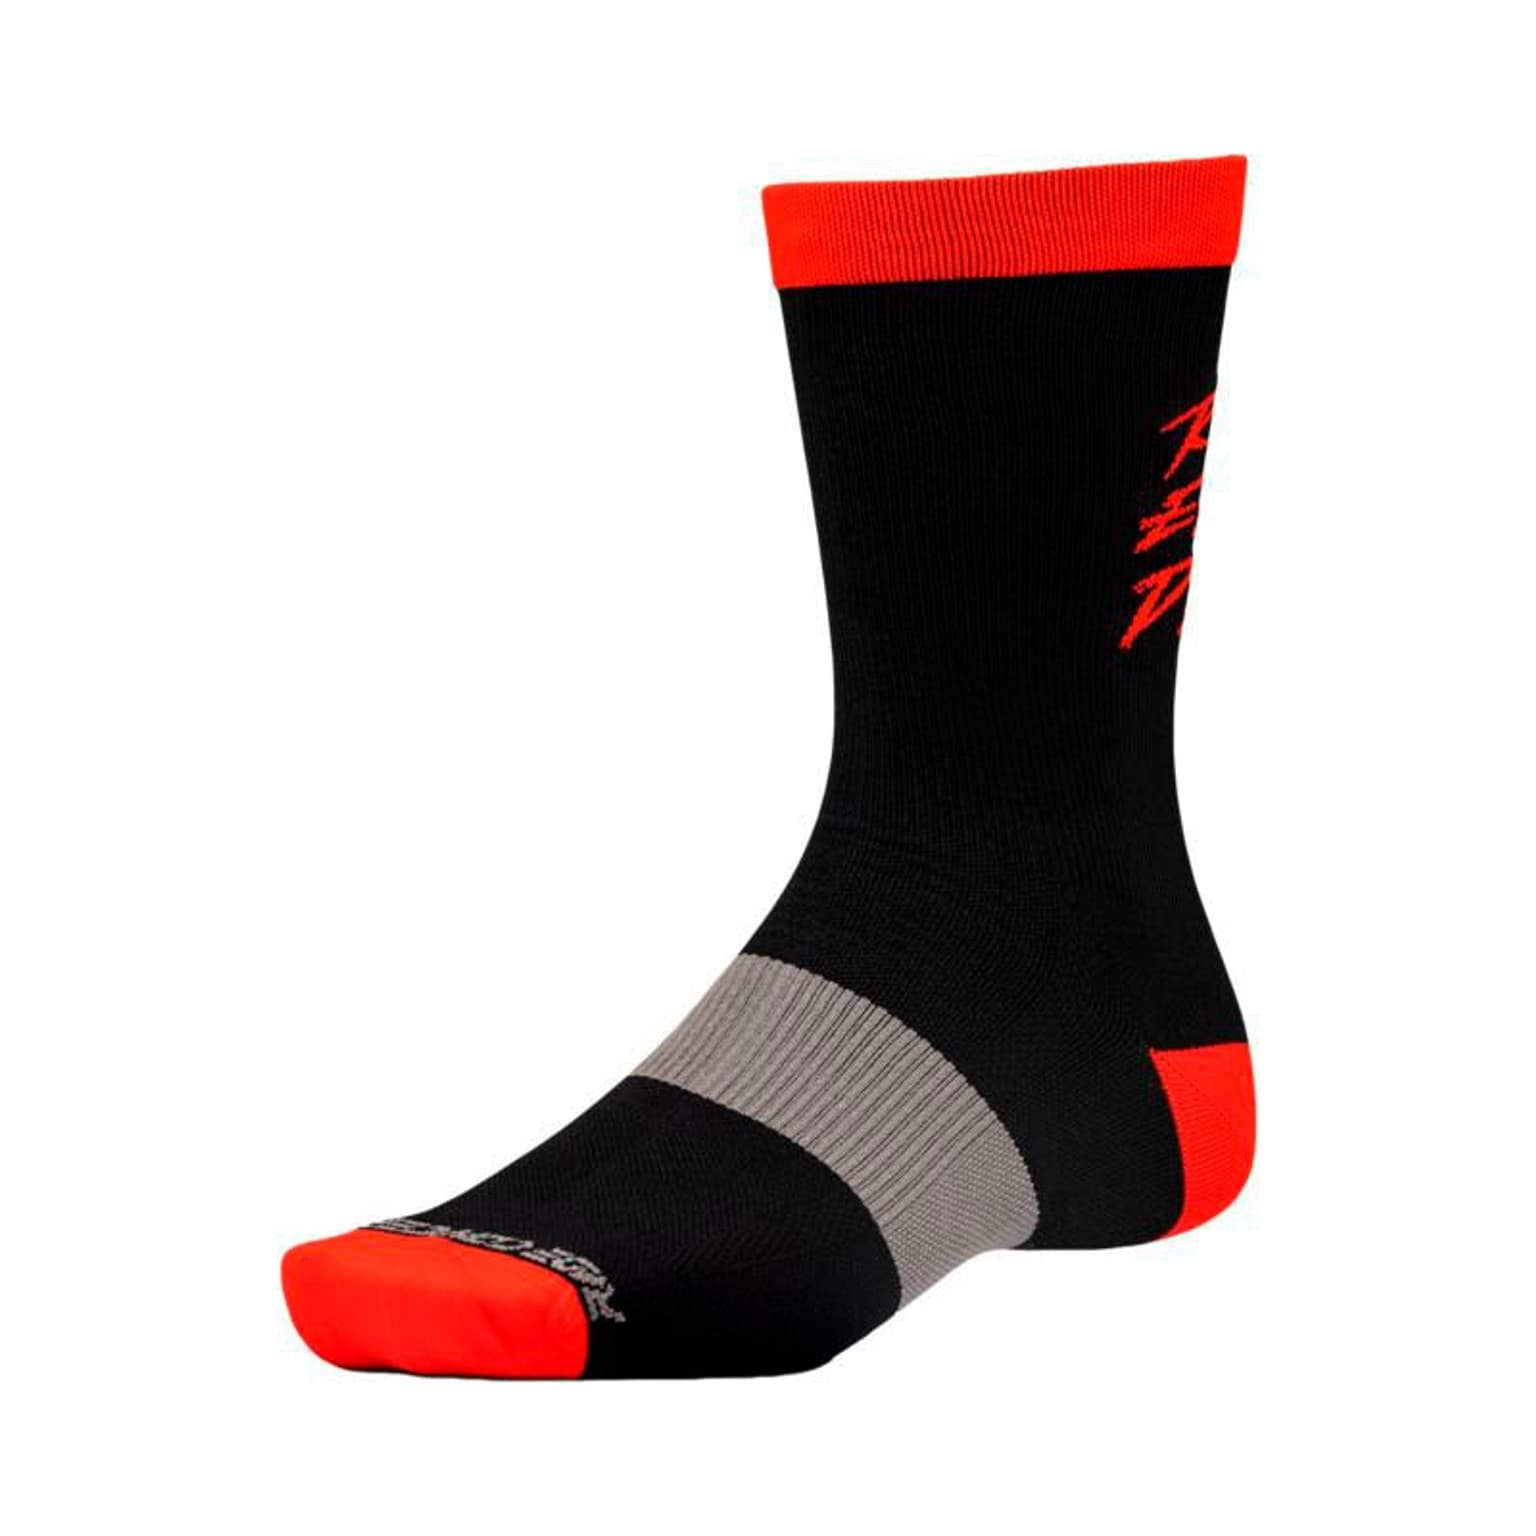 Ride Concepts Ride Concepts Ride Every Day Synthetic Velosocken rouge 2